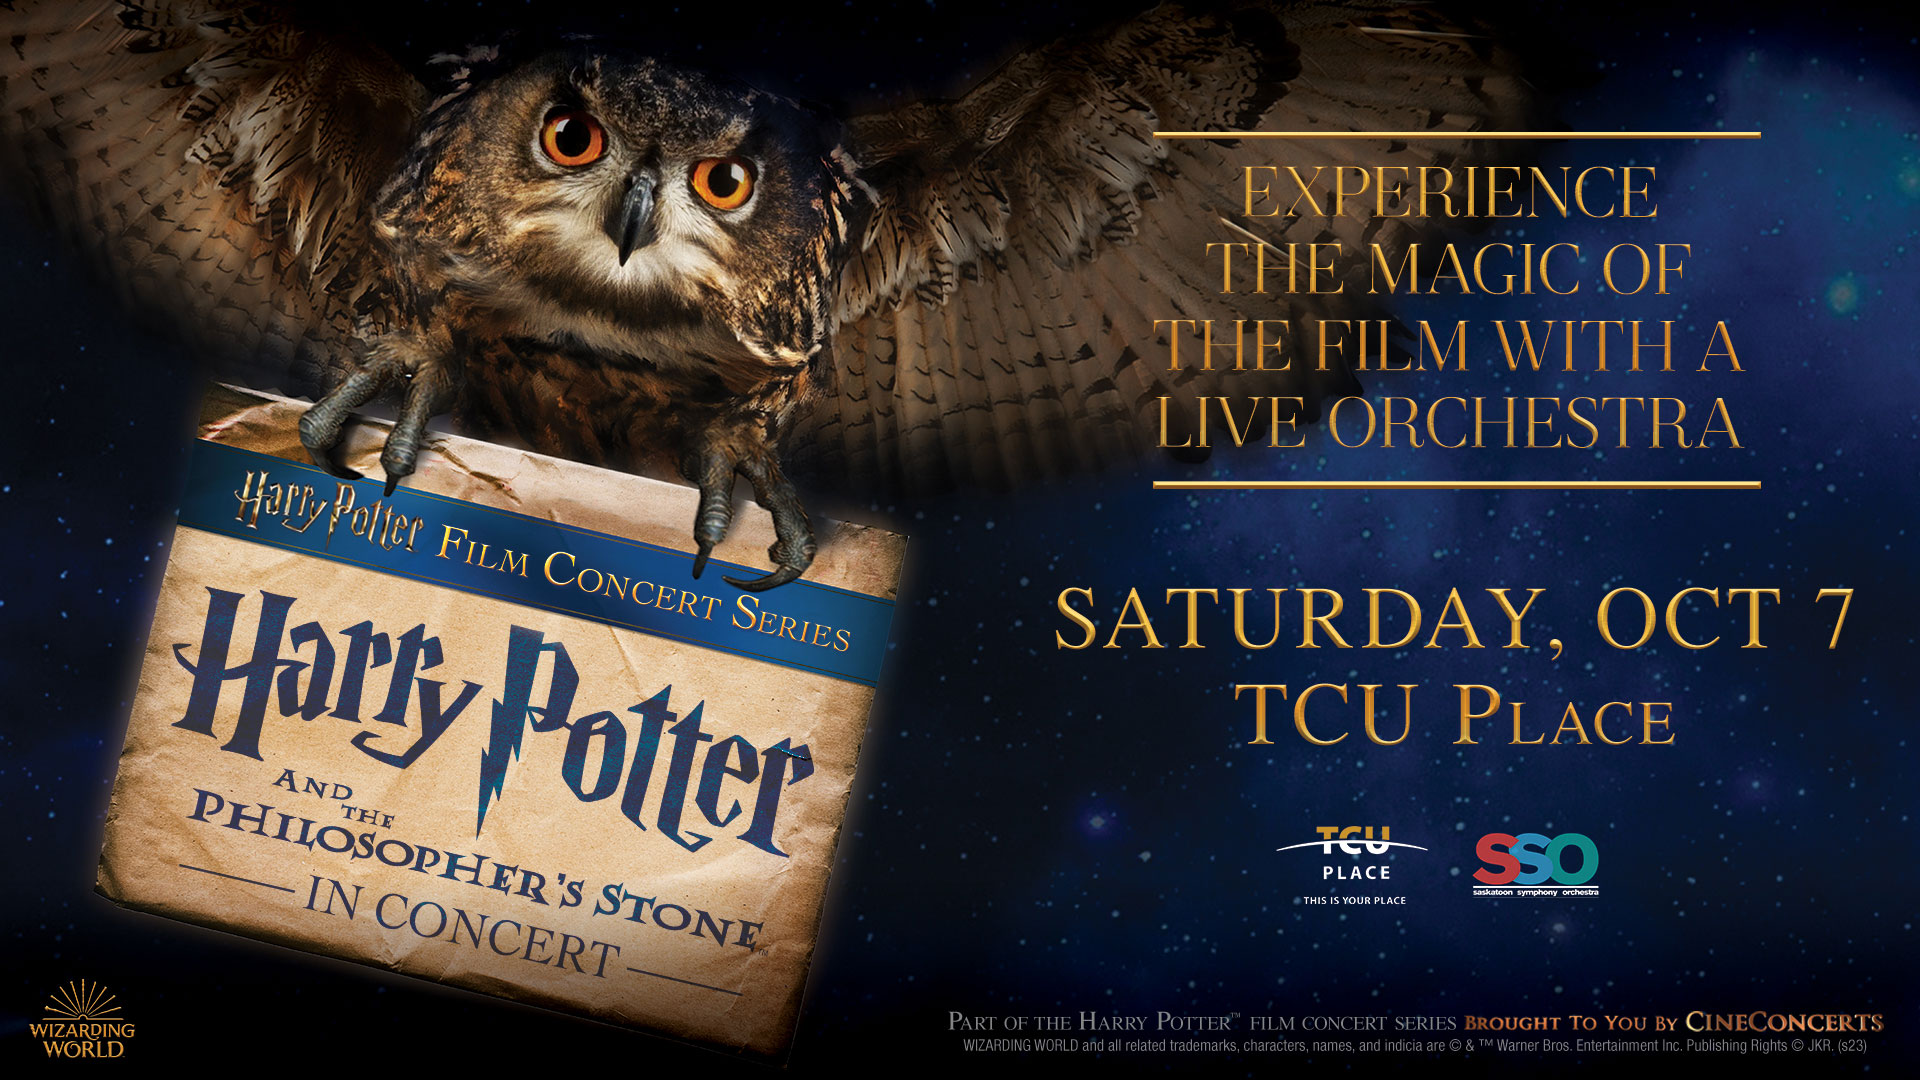 Harry Potter and the Philosopher's Stone In Concert - Oct 7th at TCU Place